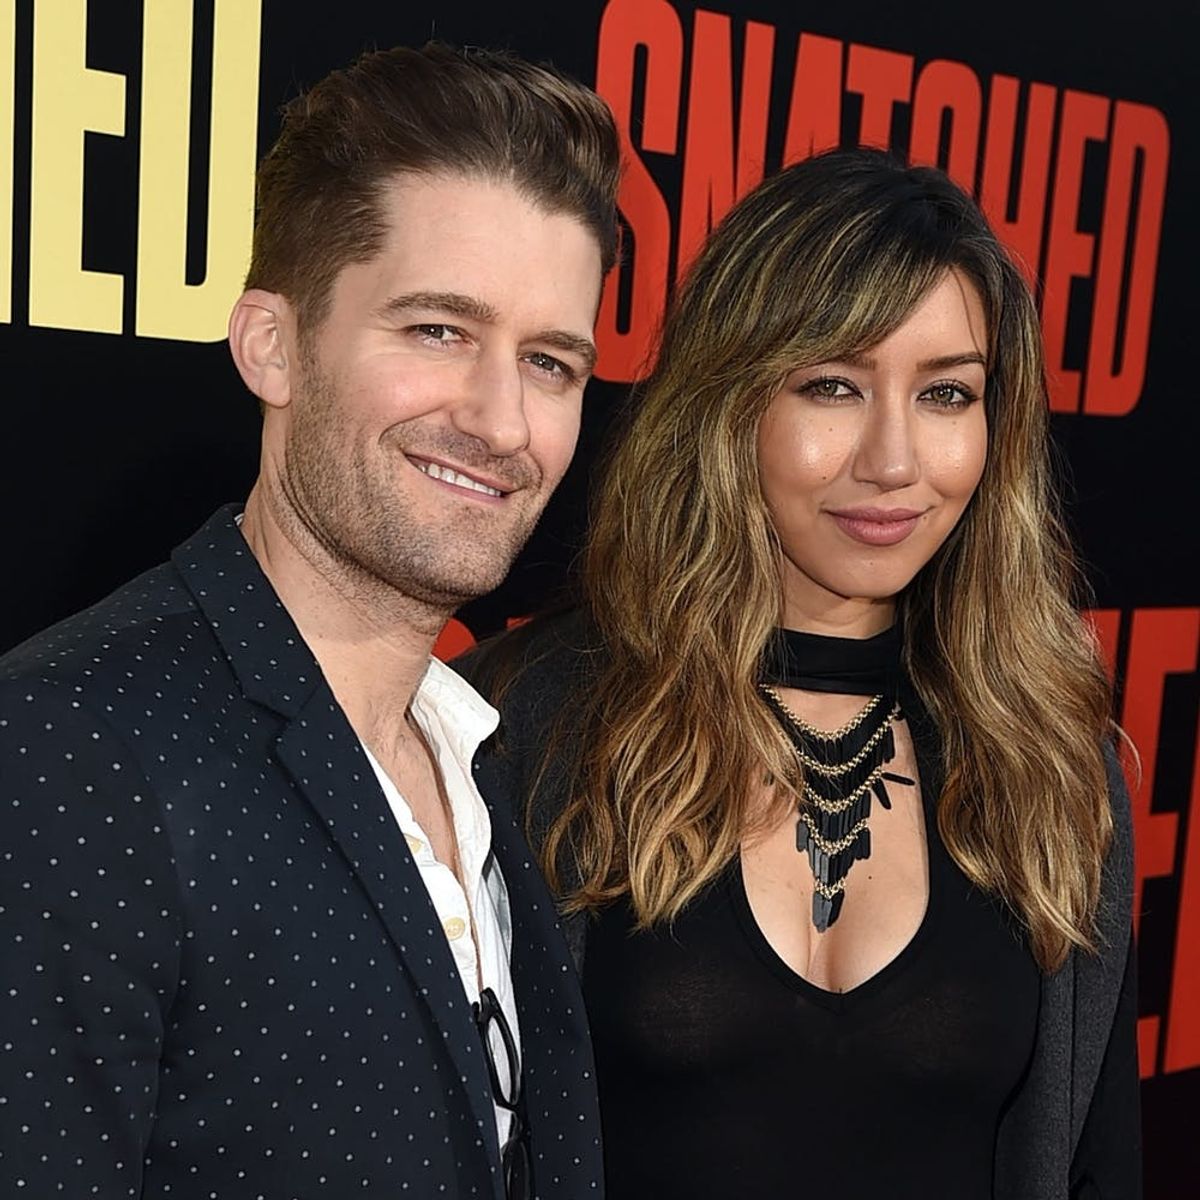 “Glee” Star Matthew Morrison Is Officially a Daddy and His Son Has the Most Unique Name